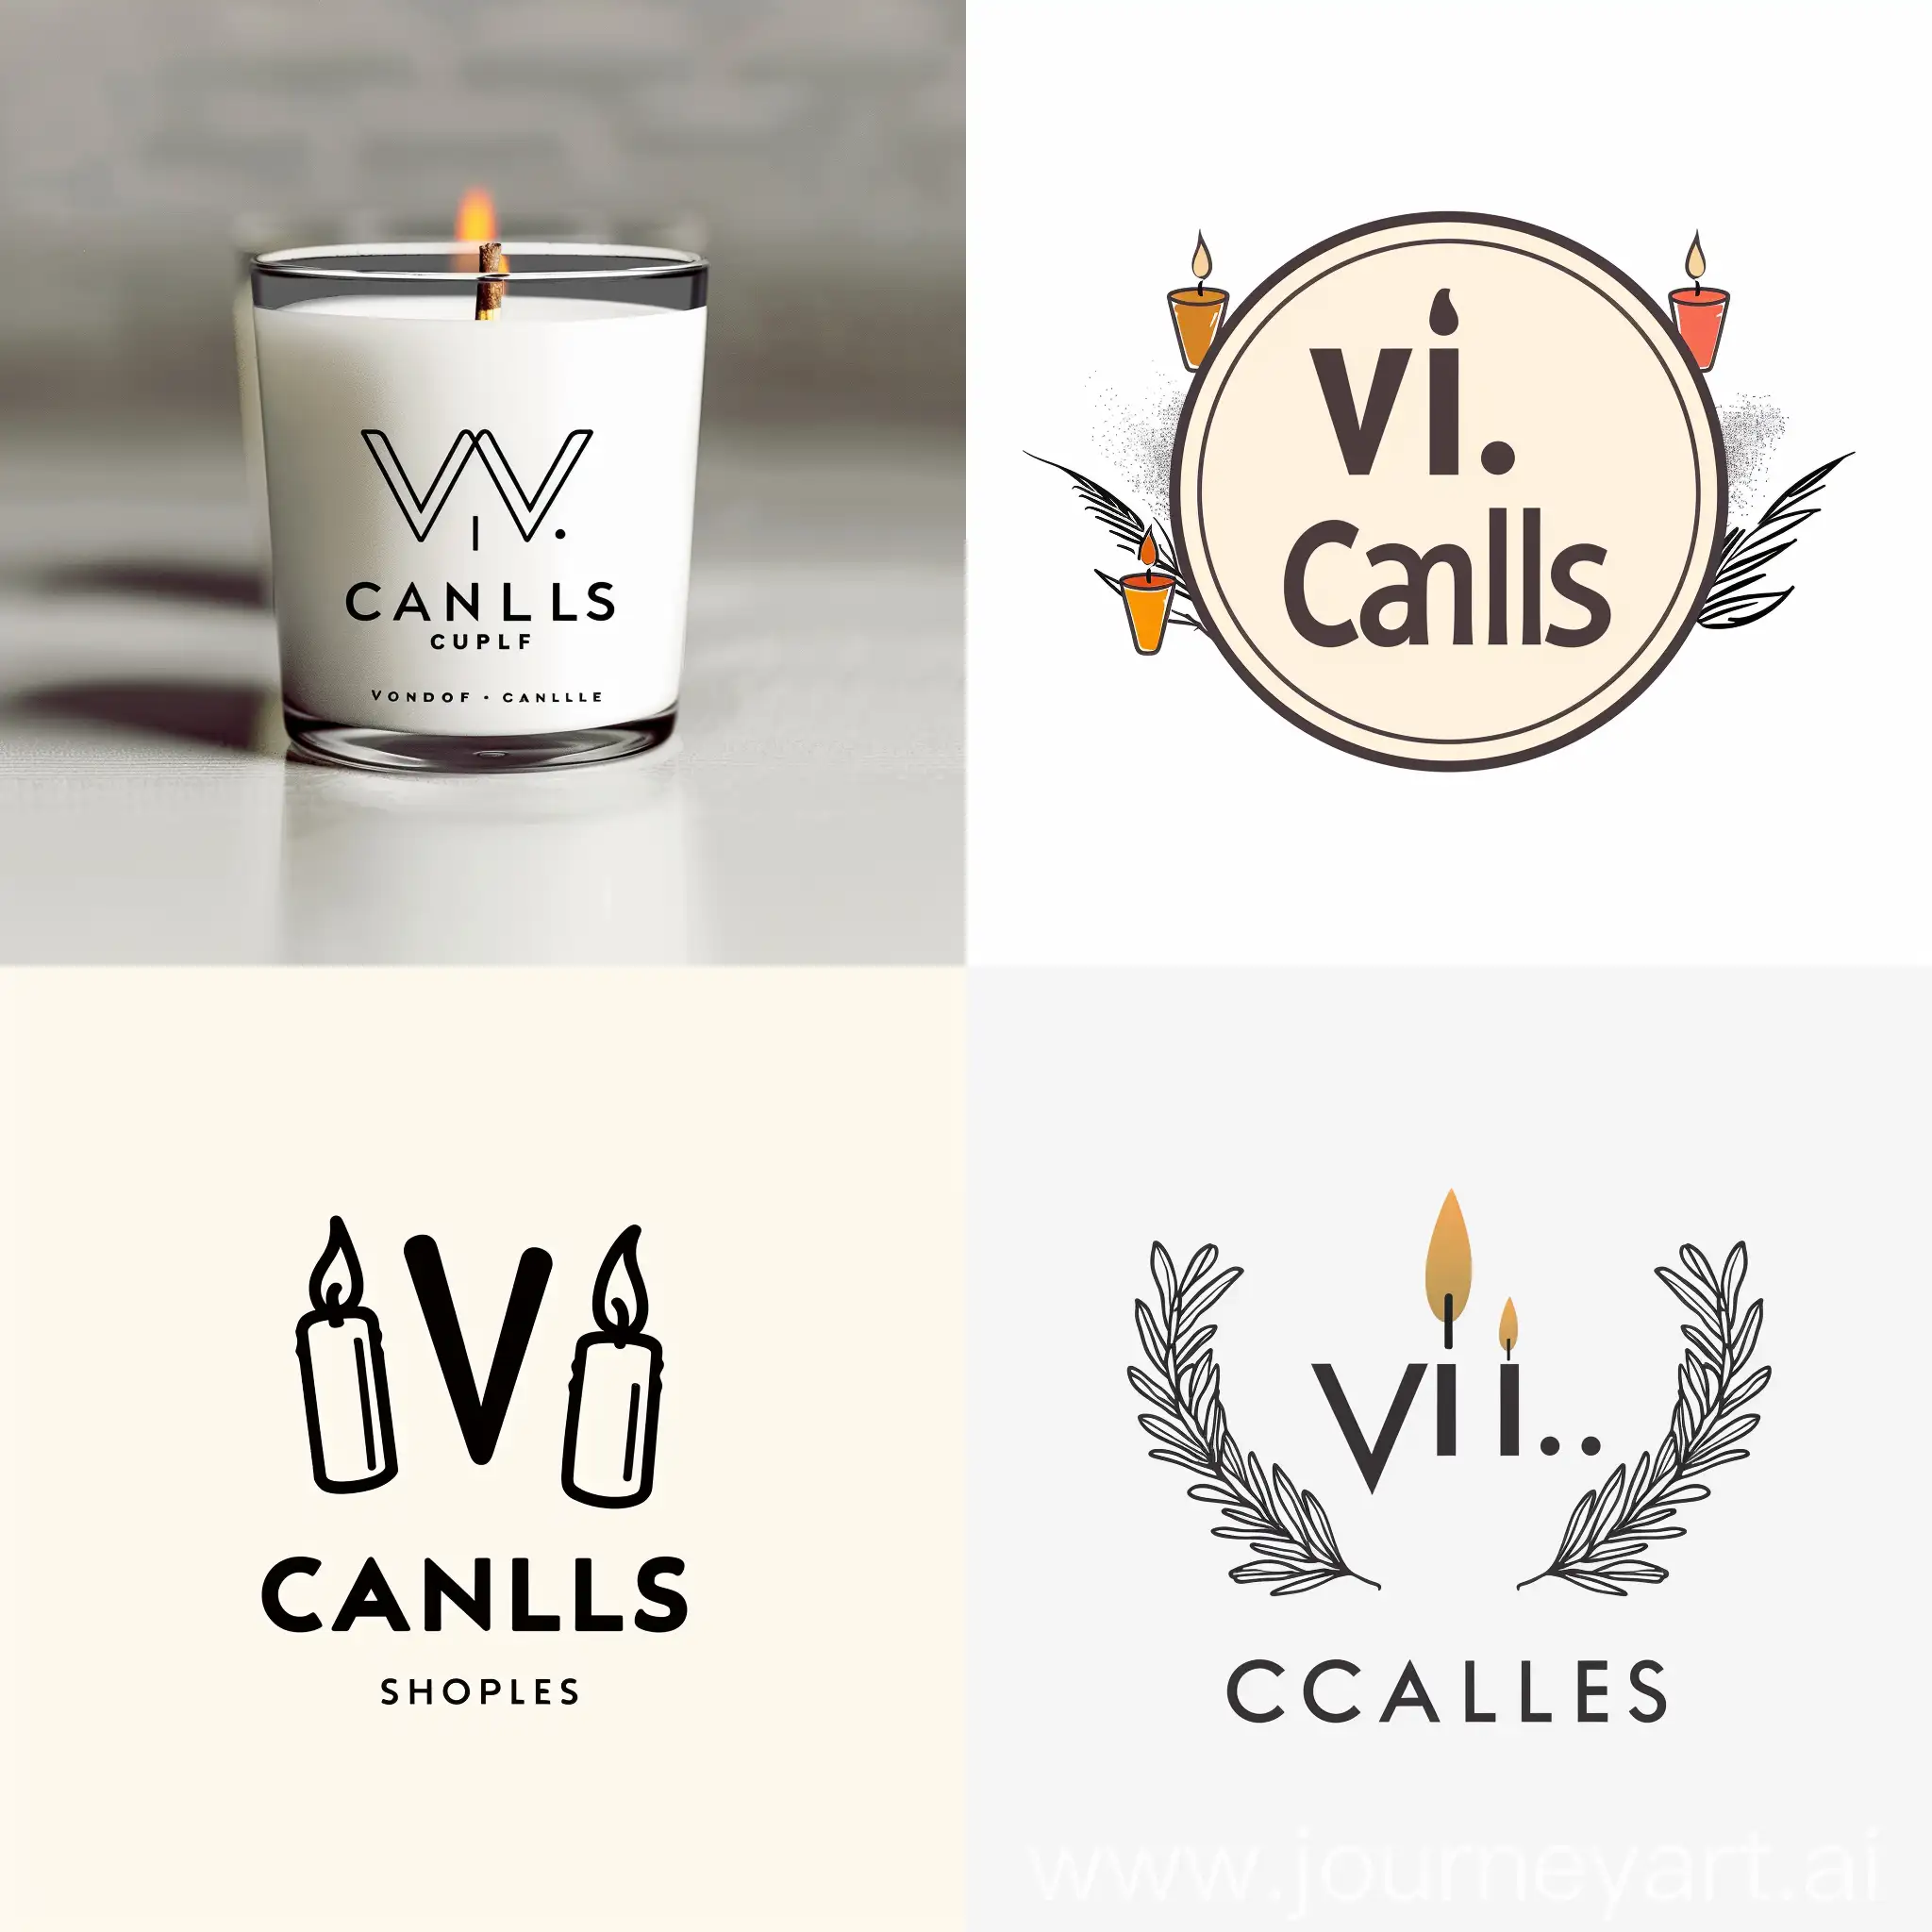 Handcrafted-Candles-at-ViCandles-Shop-Warm-Glow-in-Every-Wicked-Moment